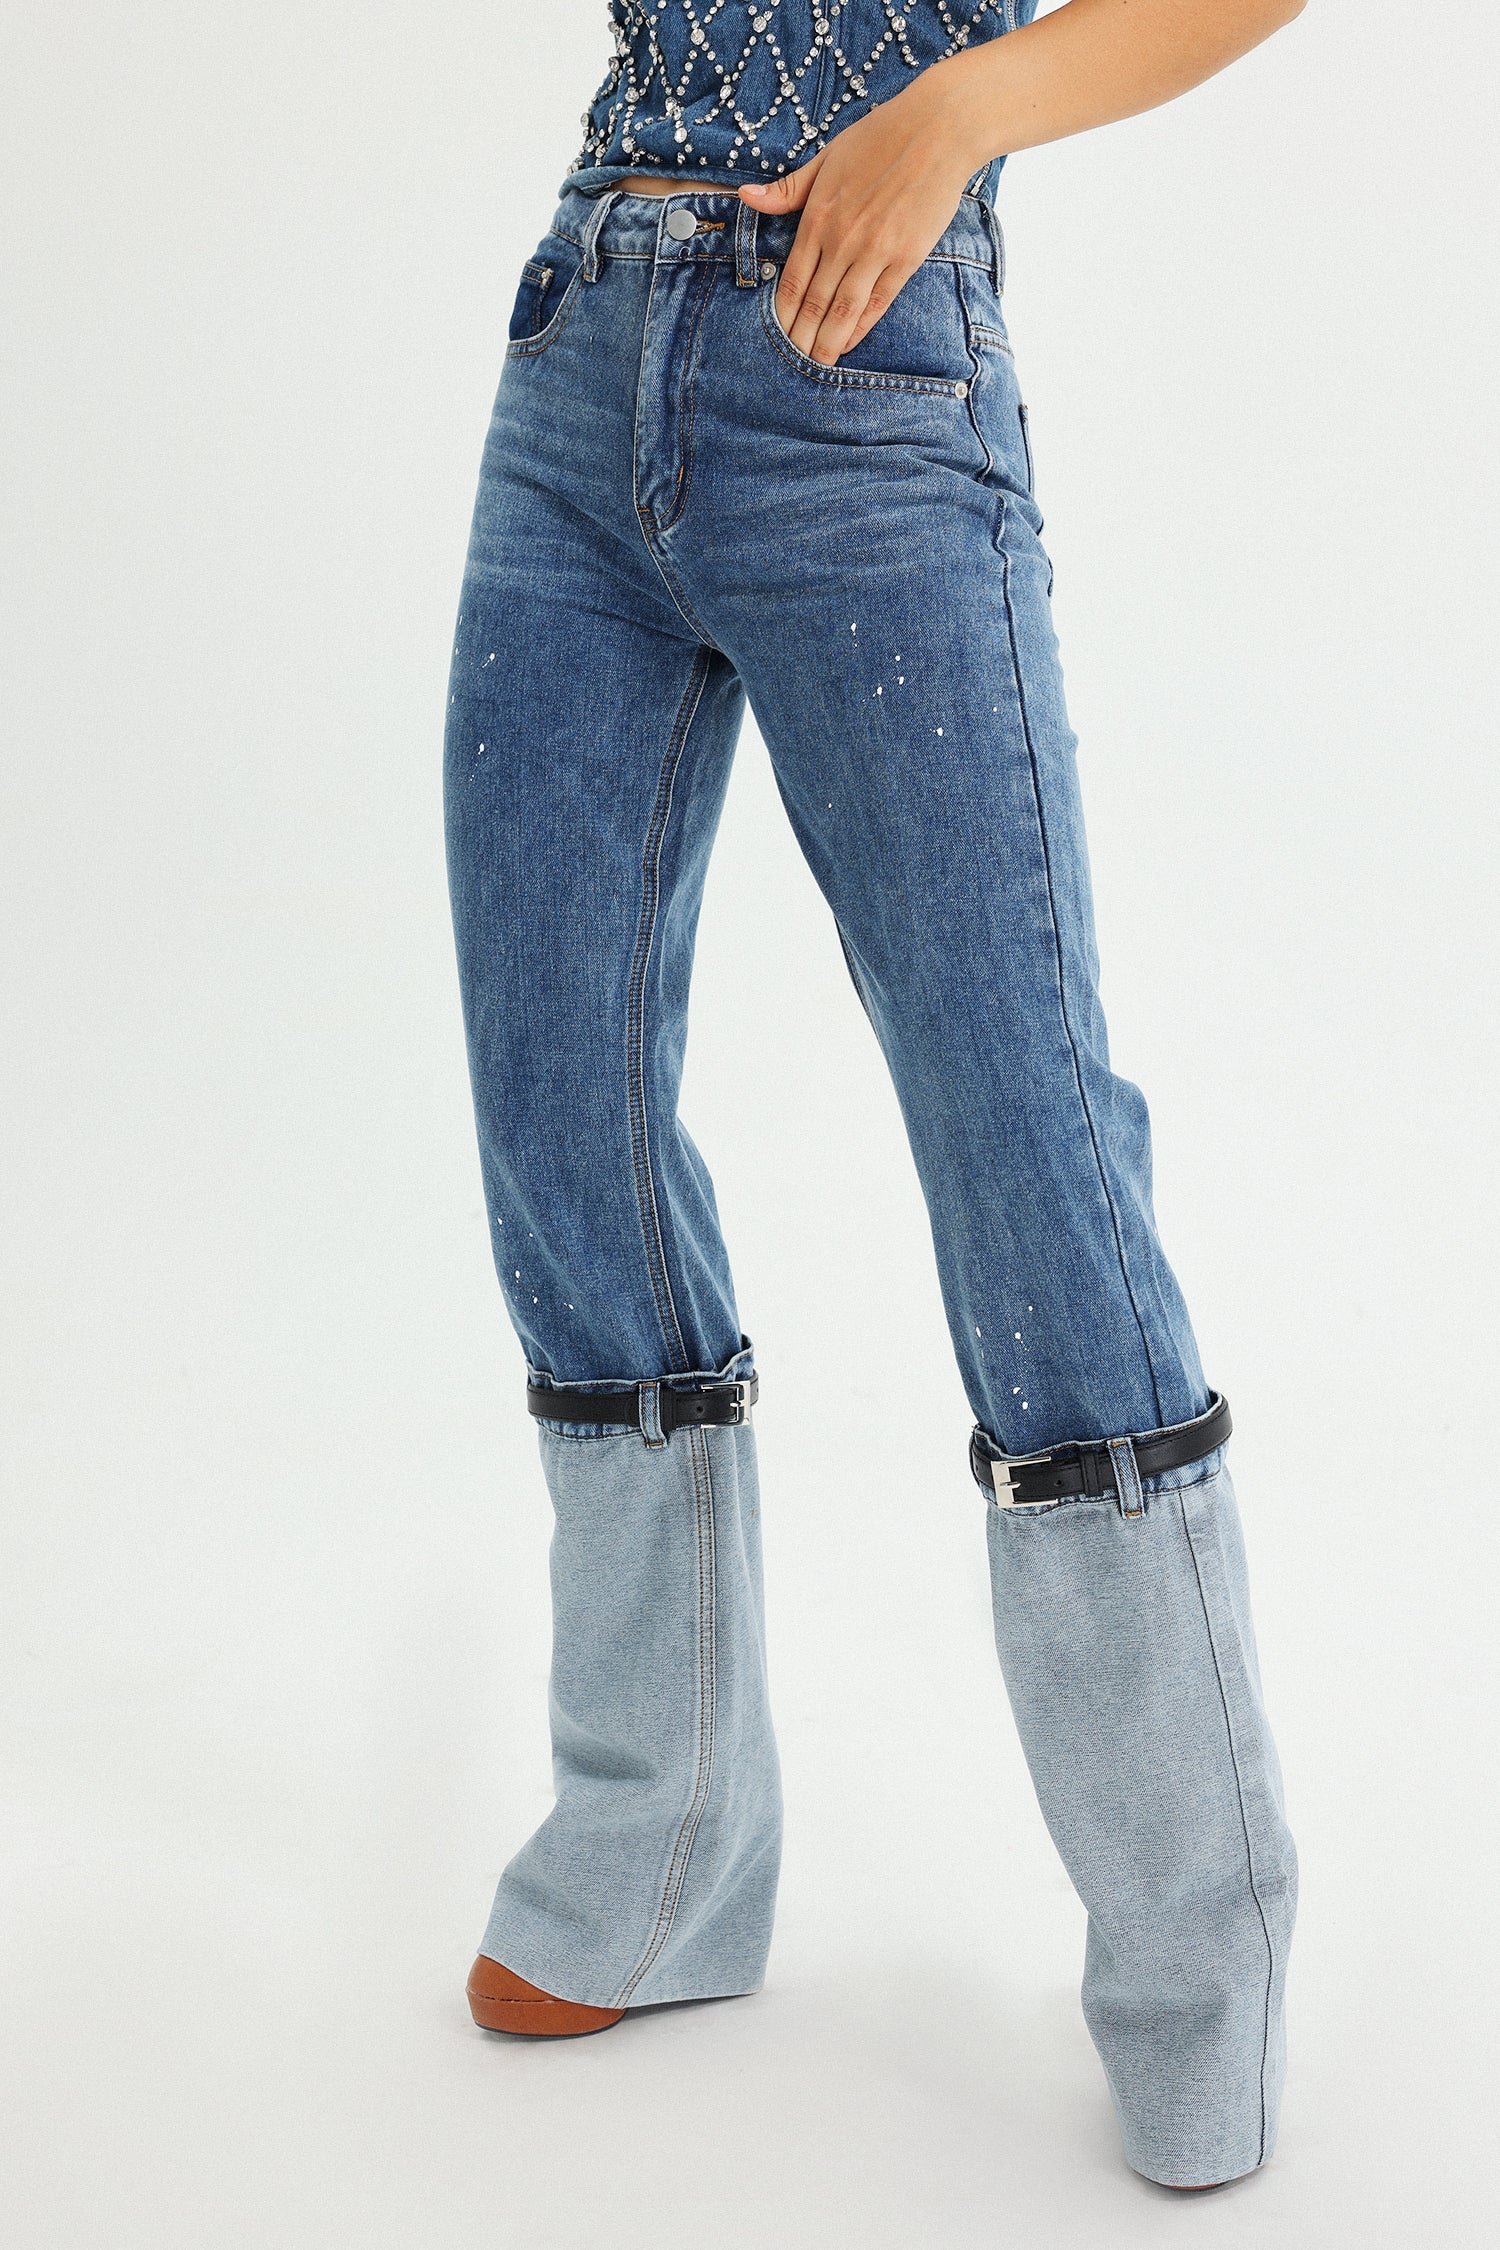 Vickee Patchwork Jeans